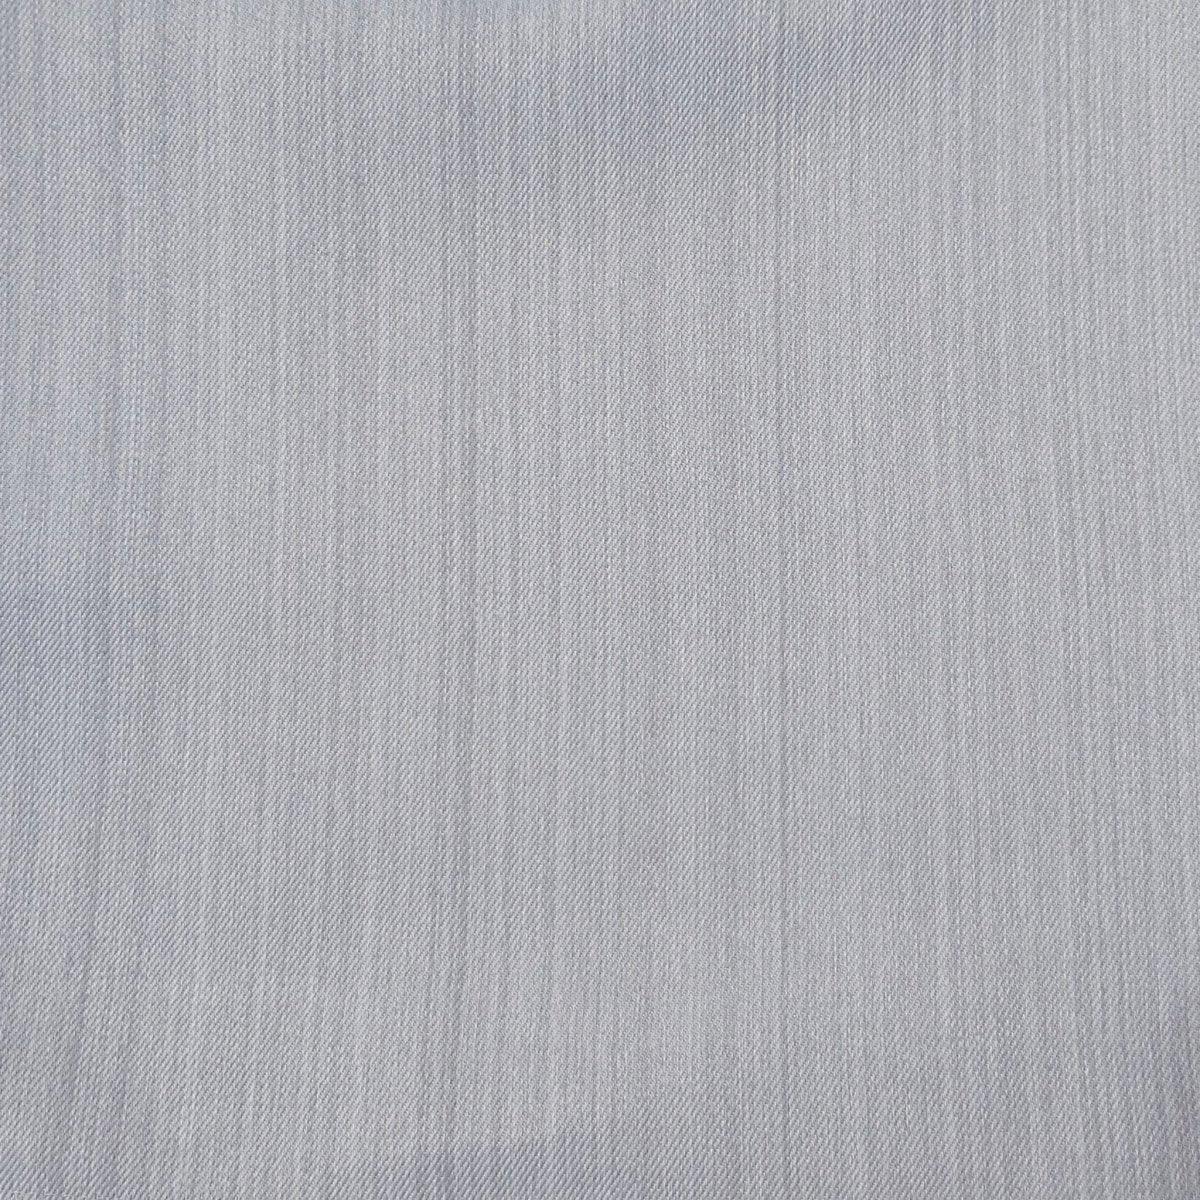 Outdoor Upholstery Fabric Cruise Pale Grey